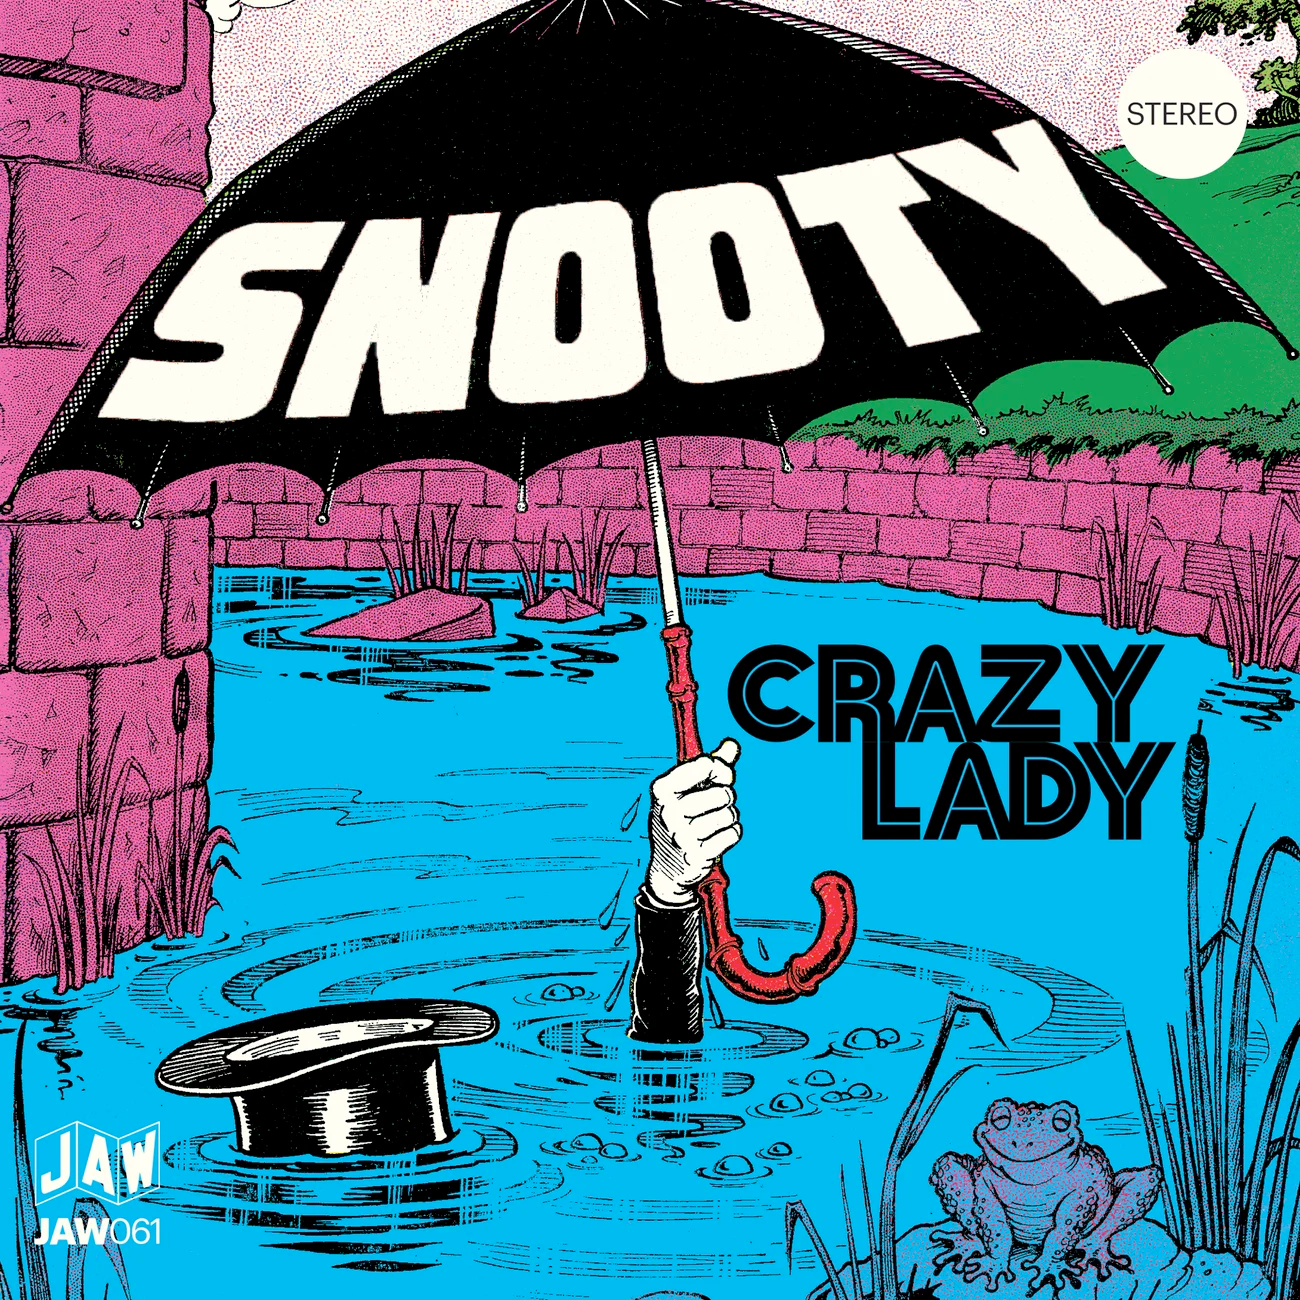 SNOOTY “Crazy Lady” / DESCONOCIDO “Oh My Lady (Our Love Is Just About Gone)” 7" [Solo agrega agua]